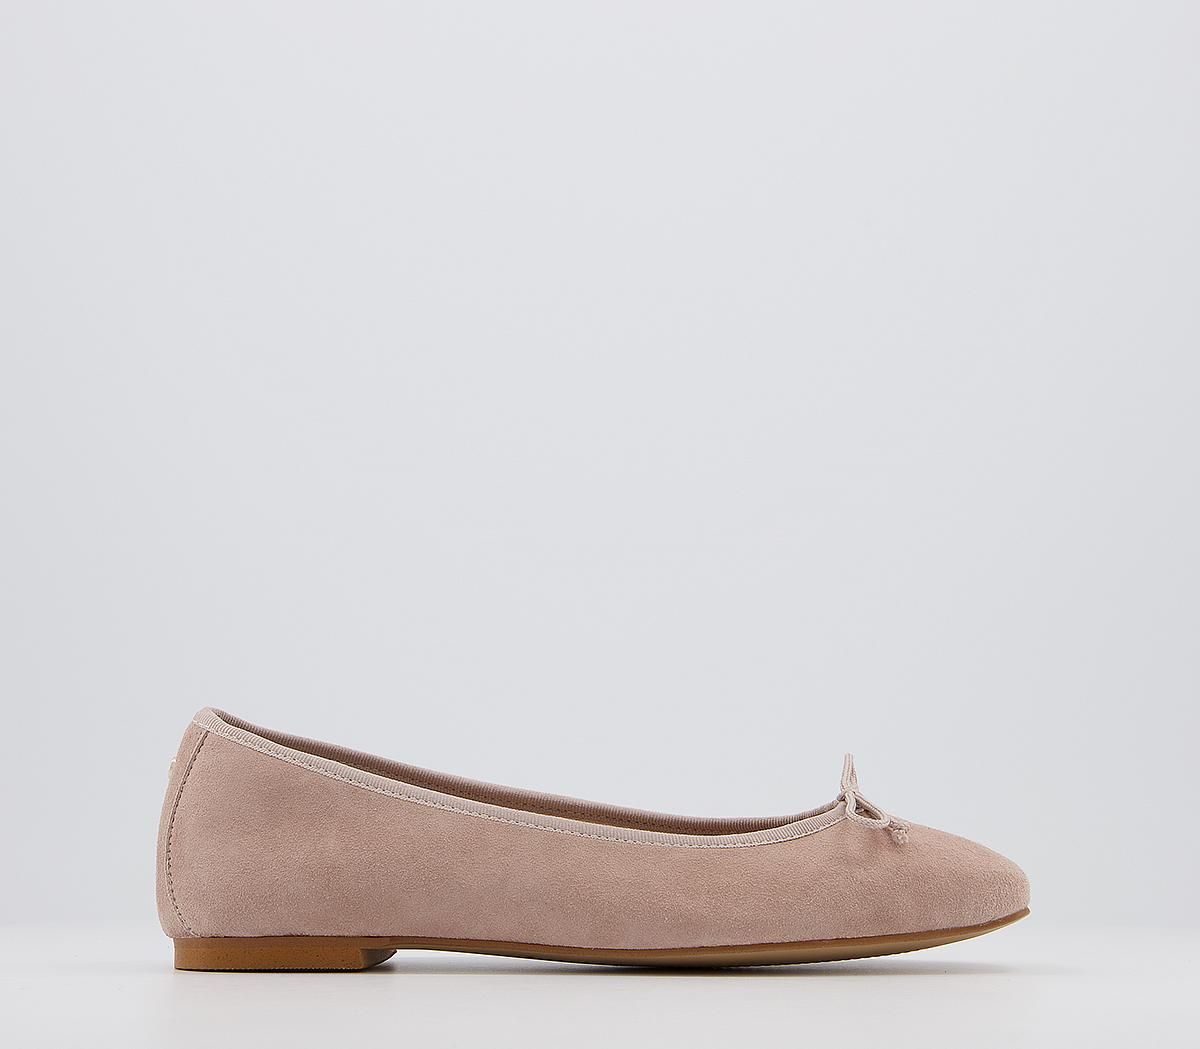 Office
								Fly away Square Toe Bow Ballerina Flats
								Nude Suede | OFFICE London (UK)